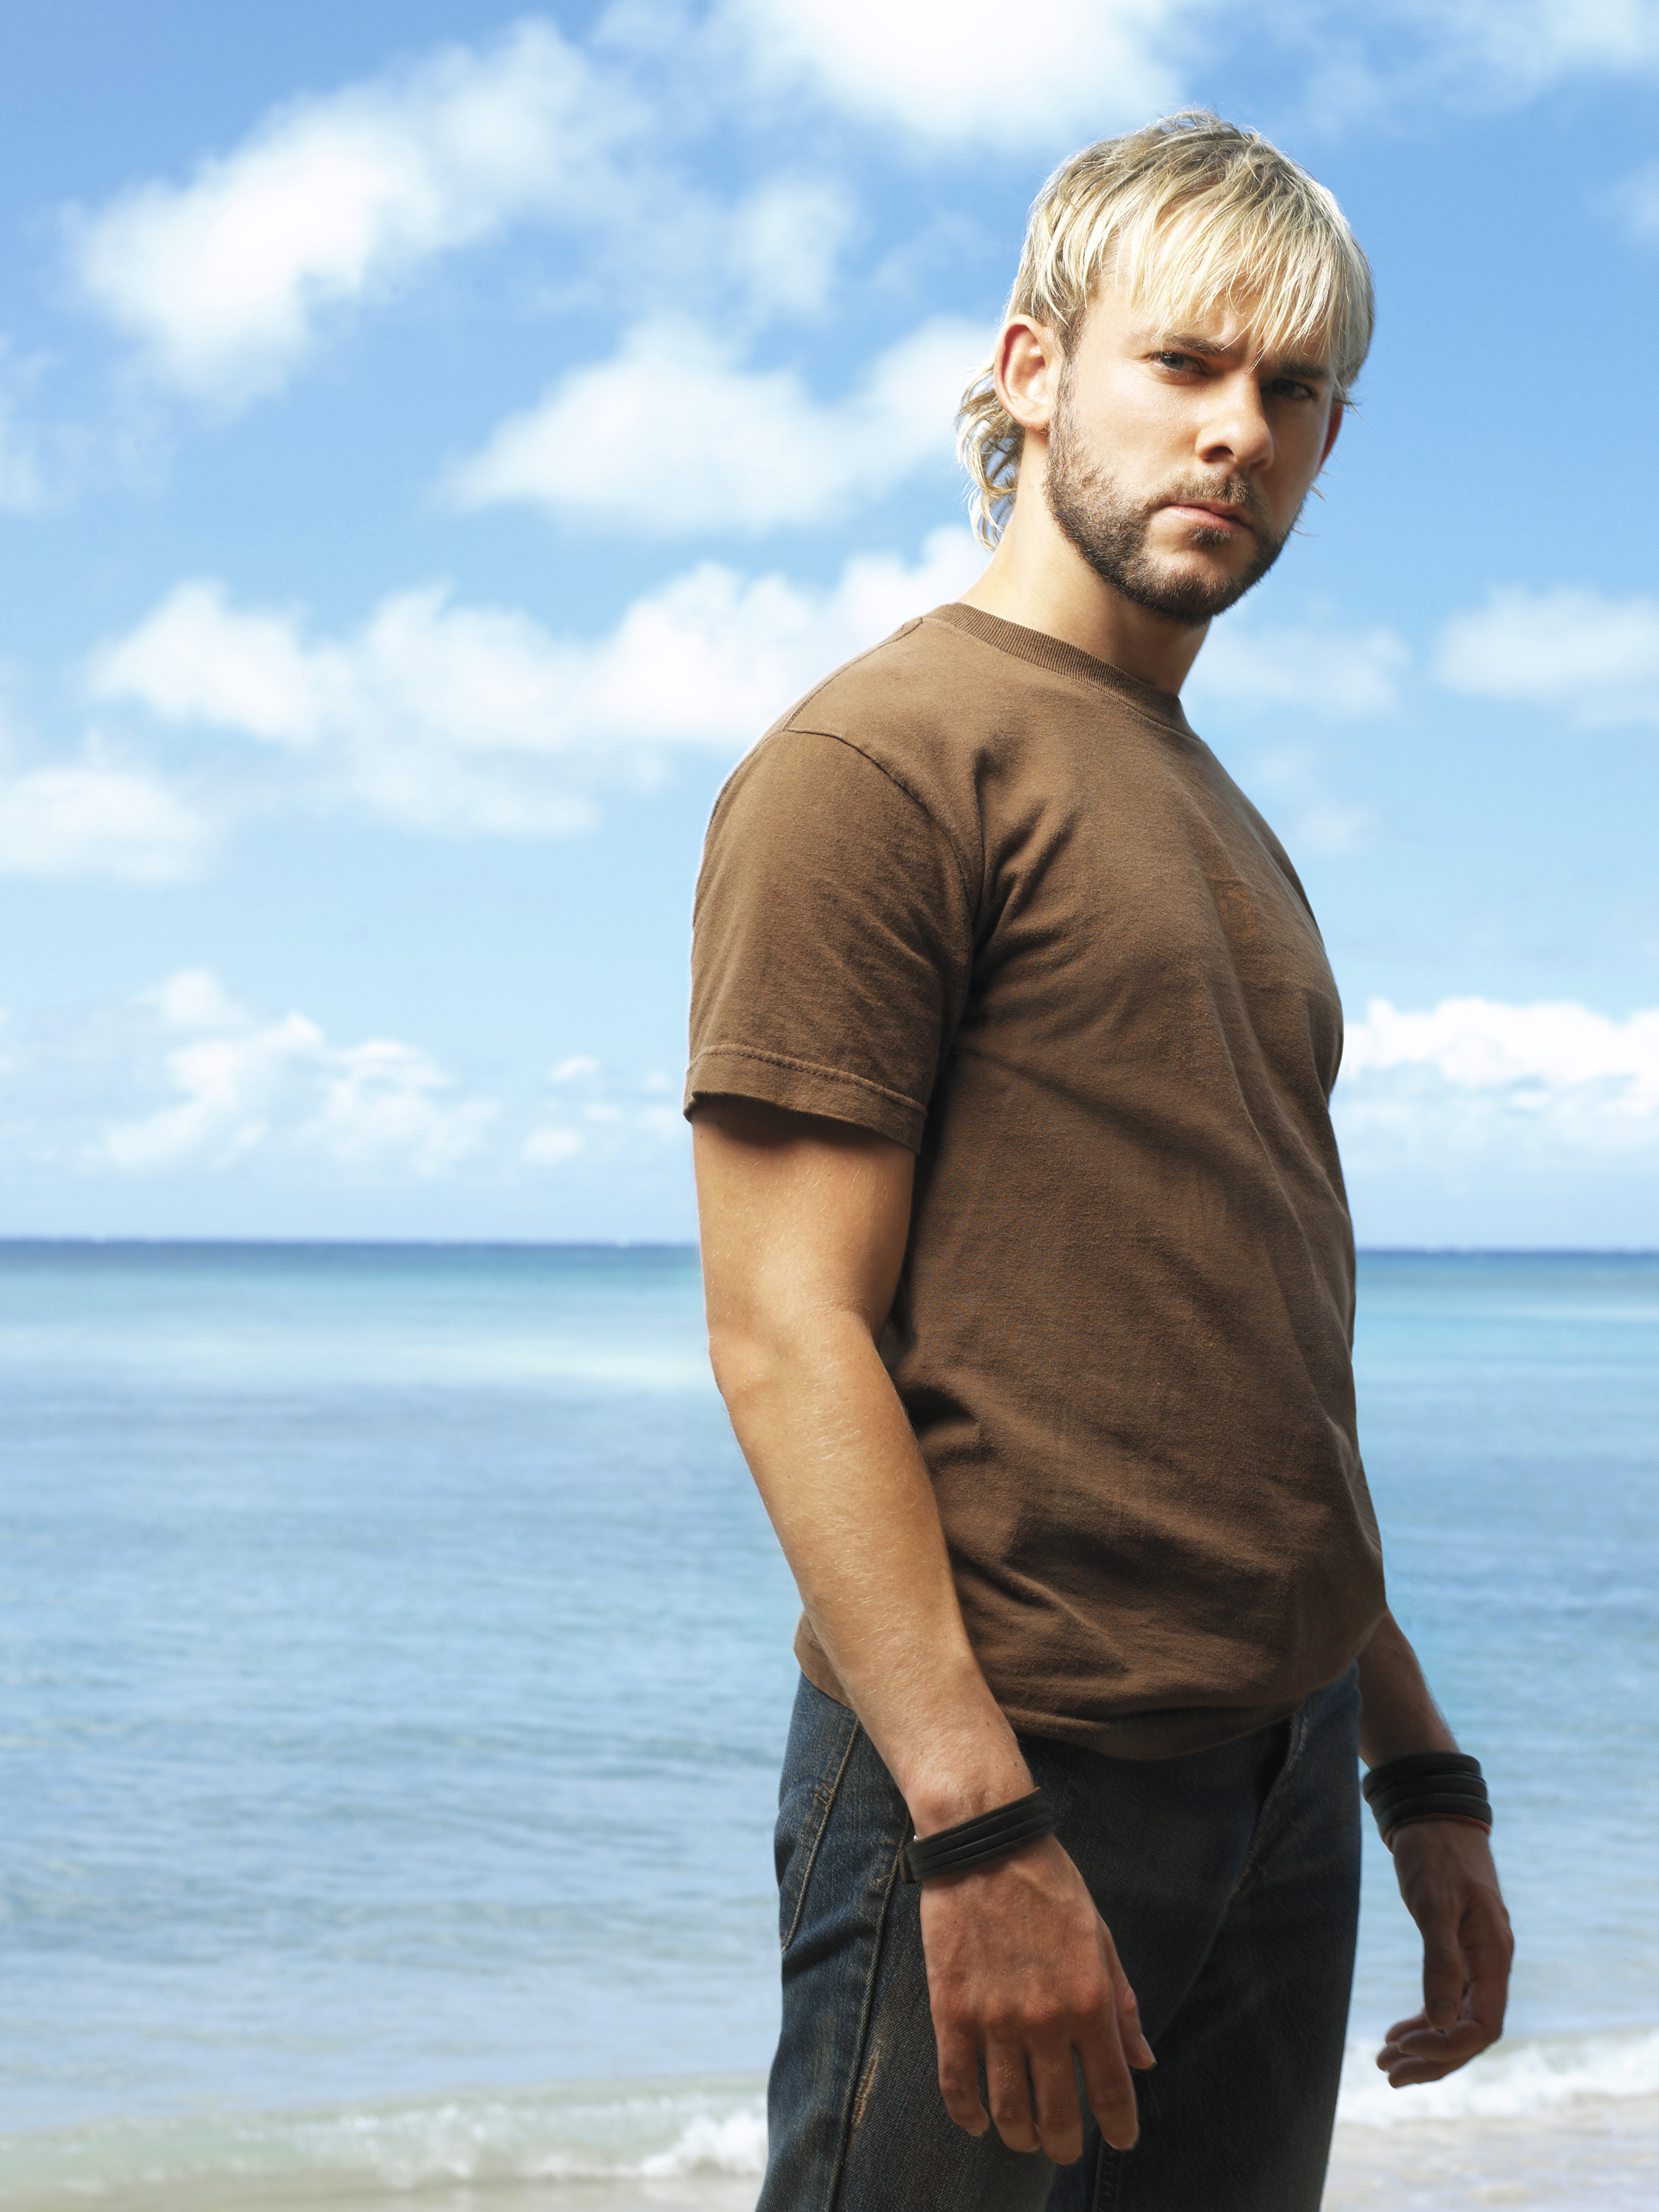 Lost Dominic Monaghan